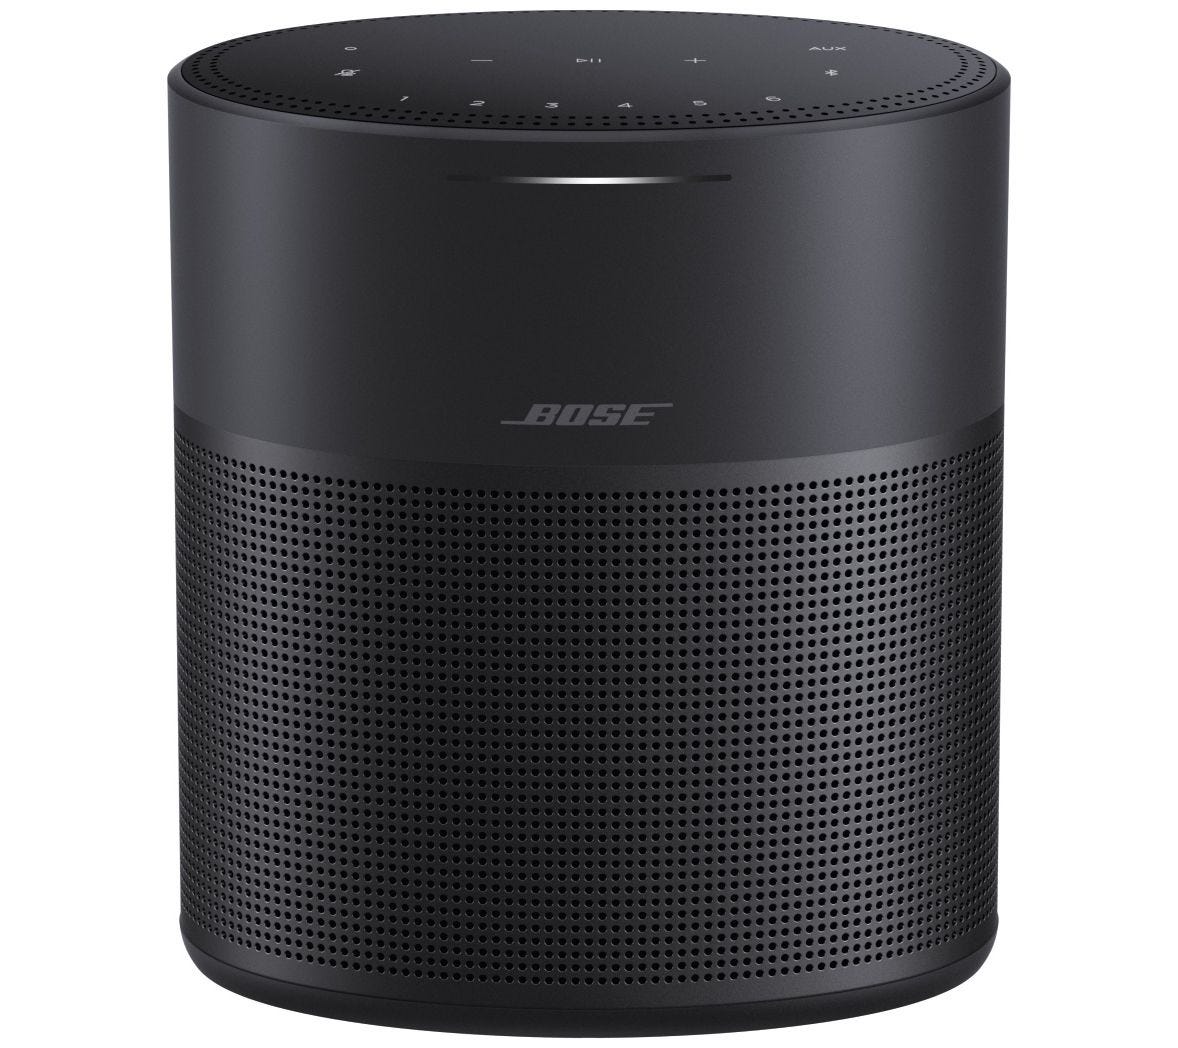 Black Friday Deals on Smart Speakers and Audio Devices